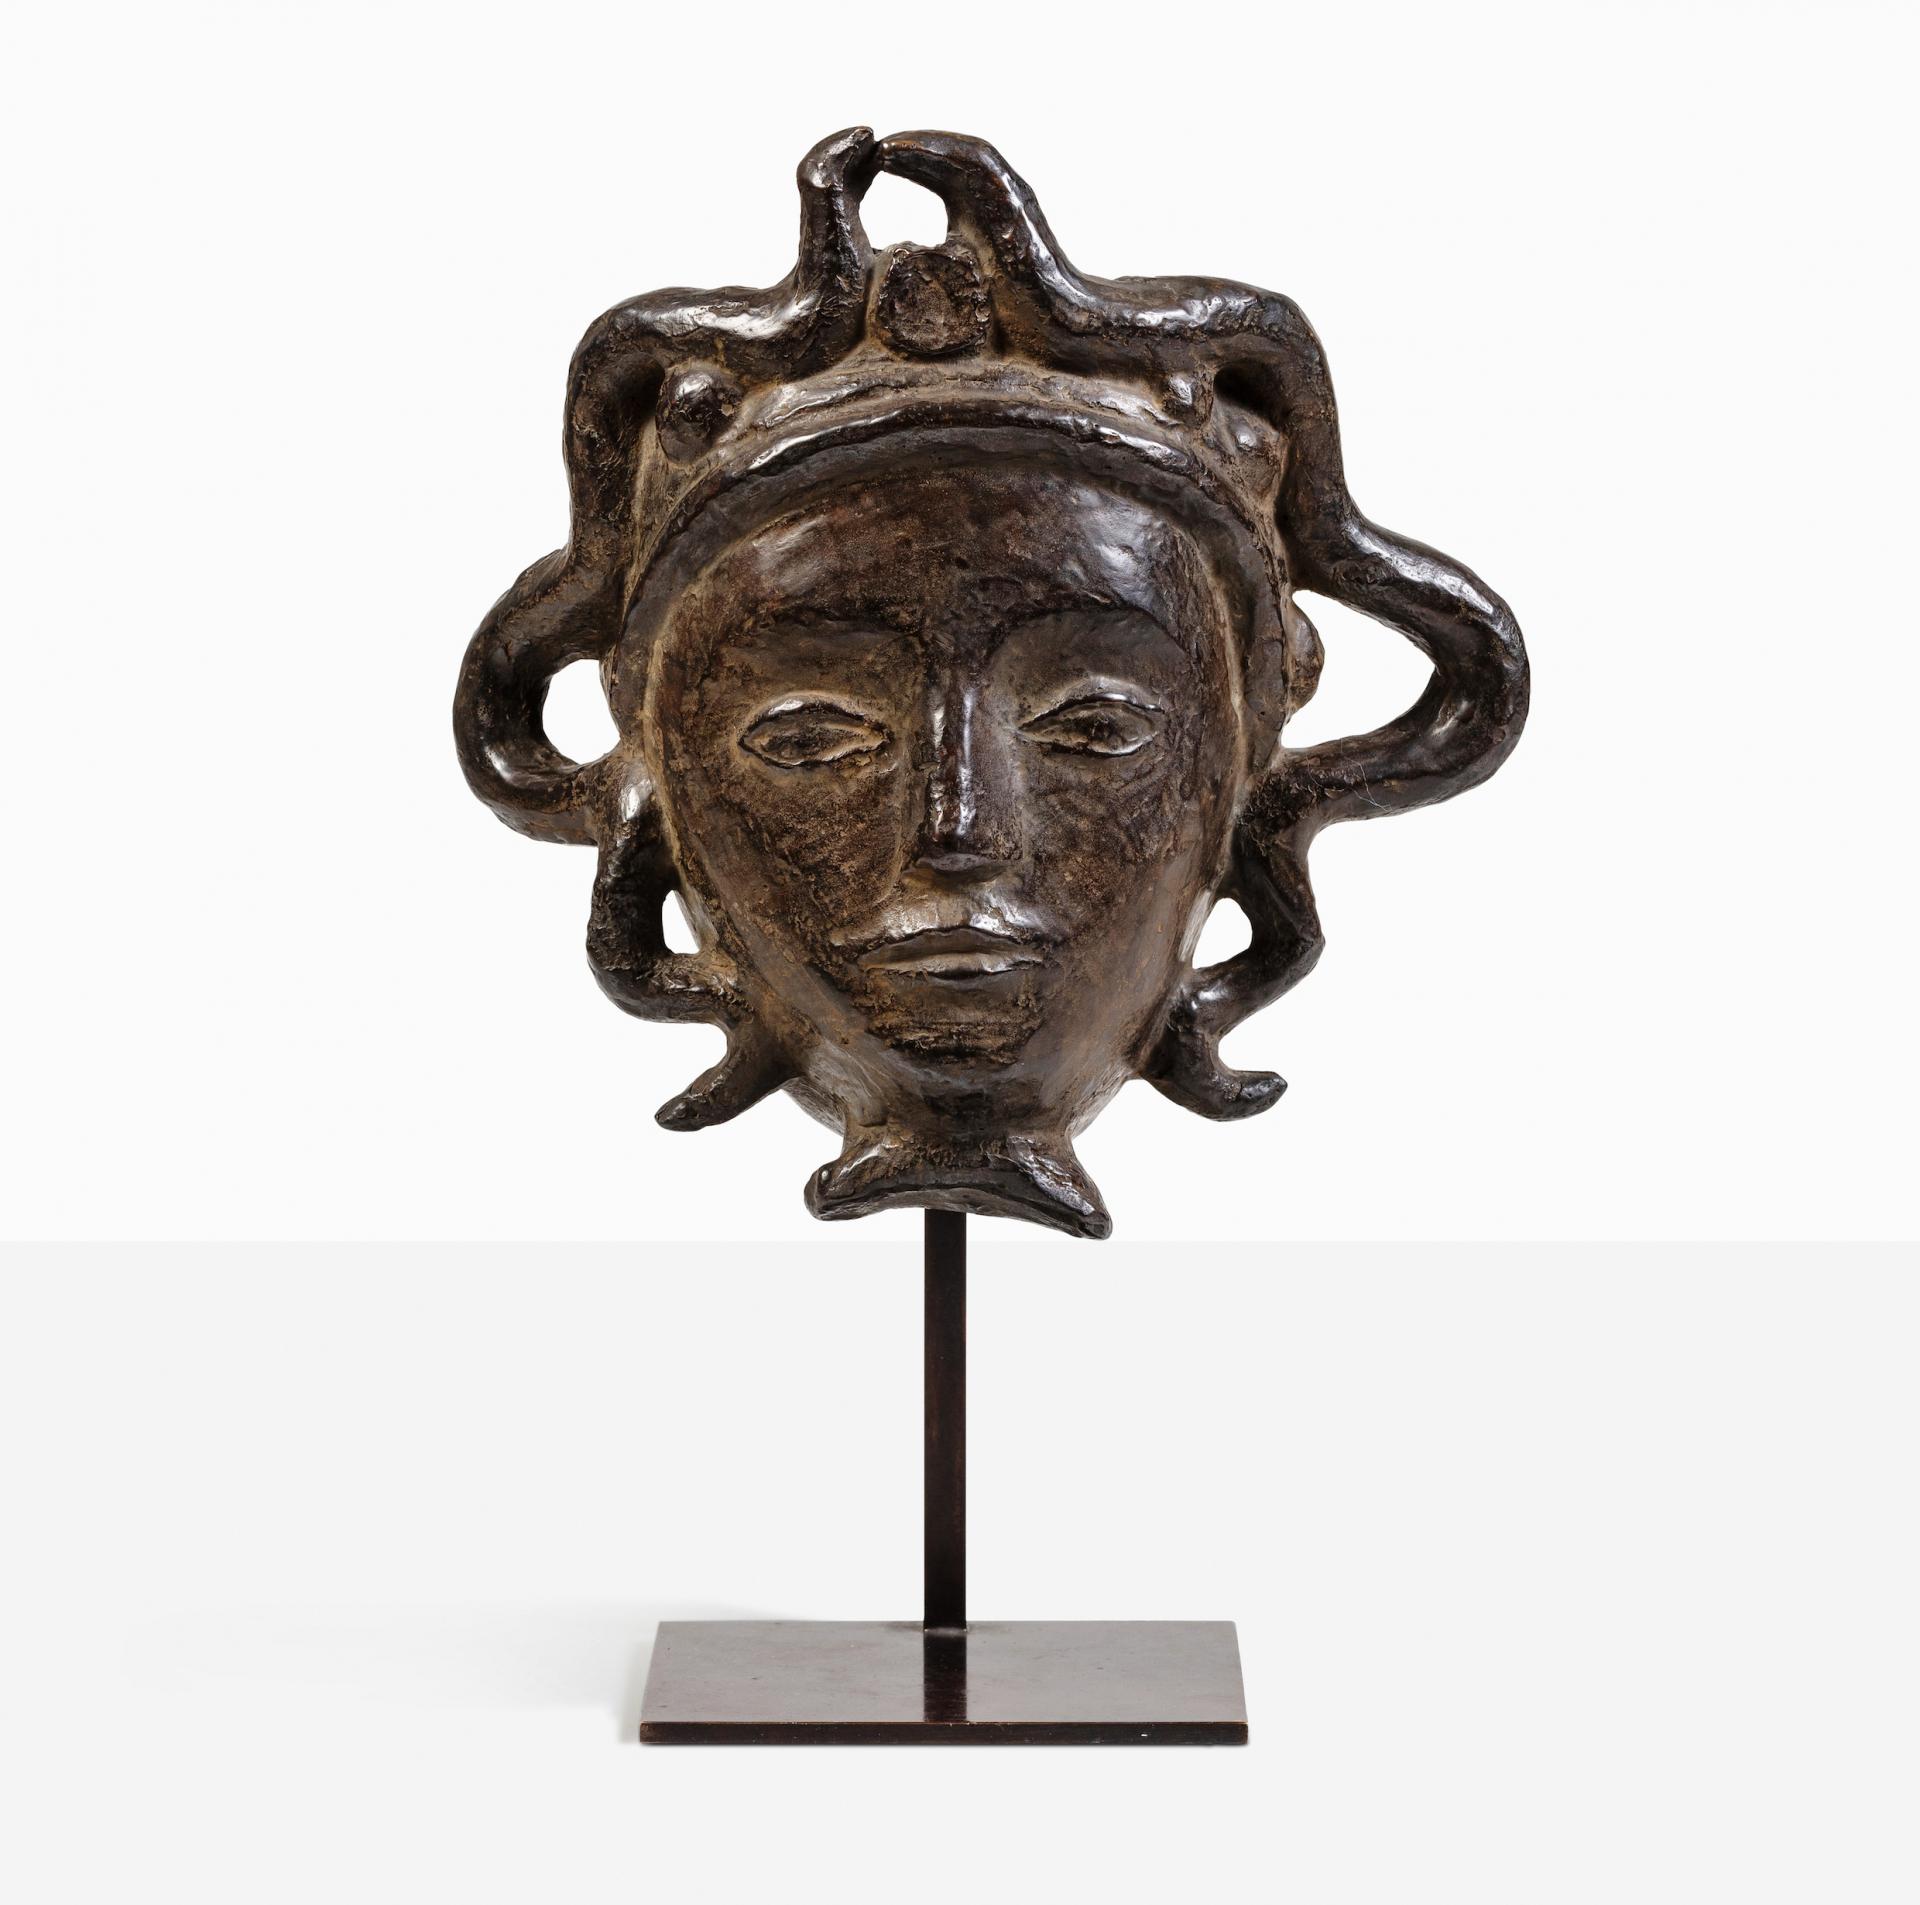 Pablo Picasso's Granddaughter Curates Sotheby's Paris 